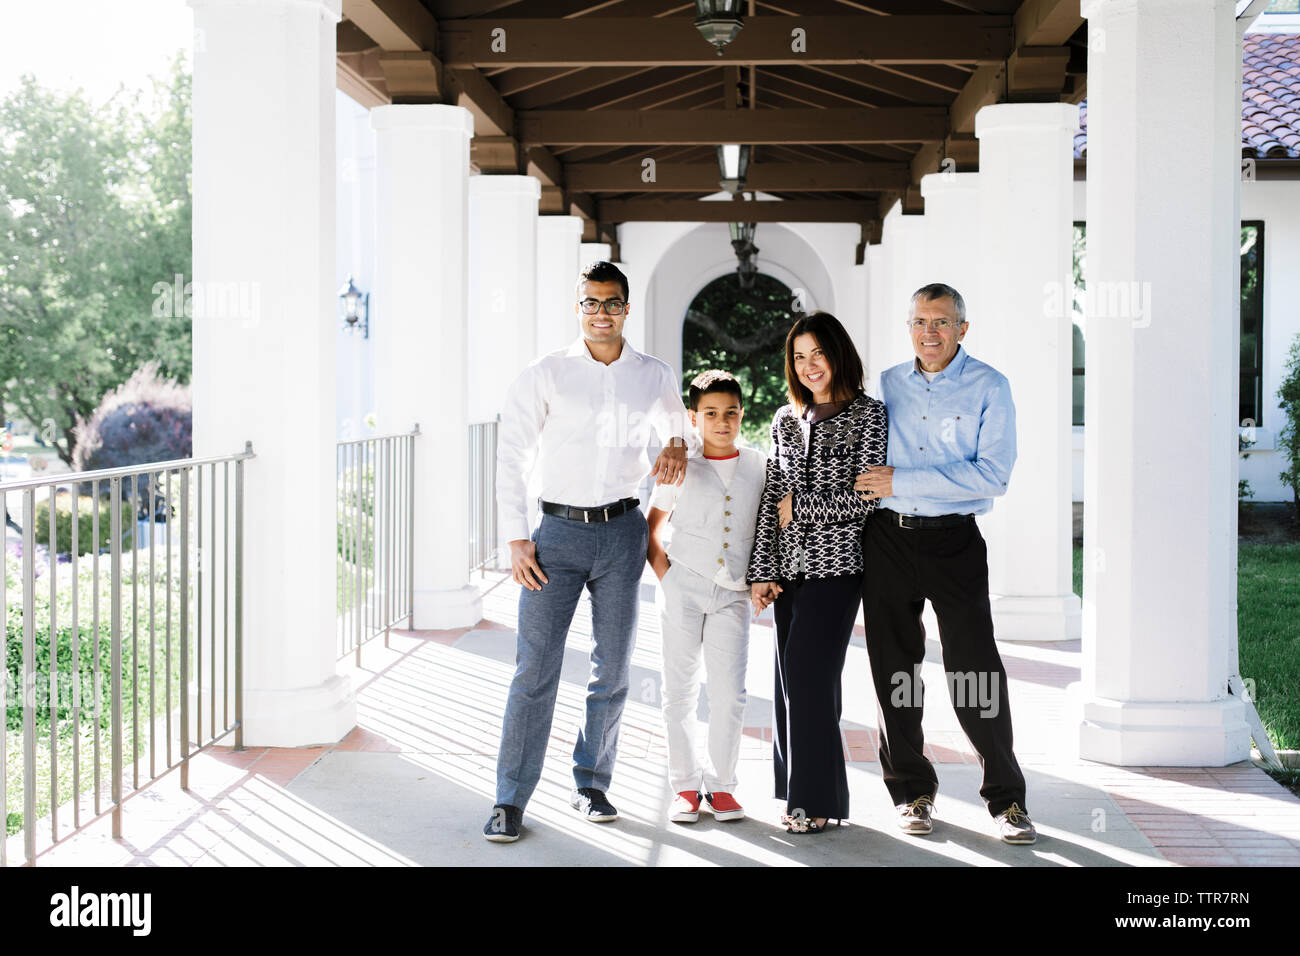 Portrait of elegant family by Spanish architecture colonnades Stock Photo